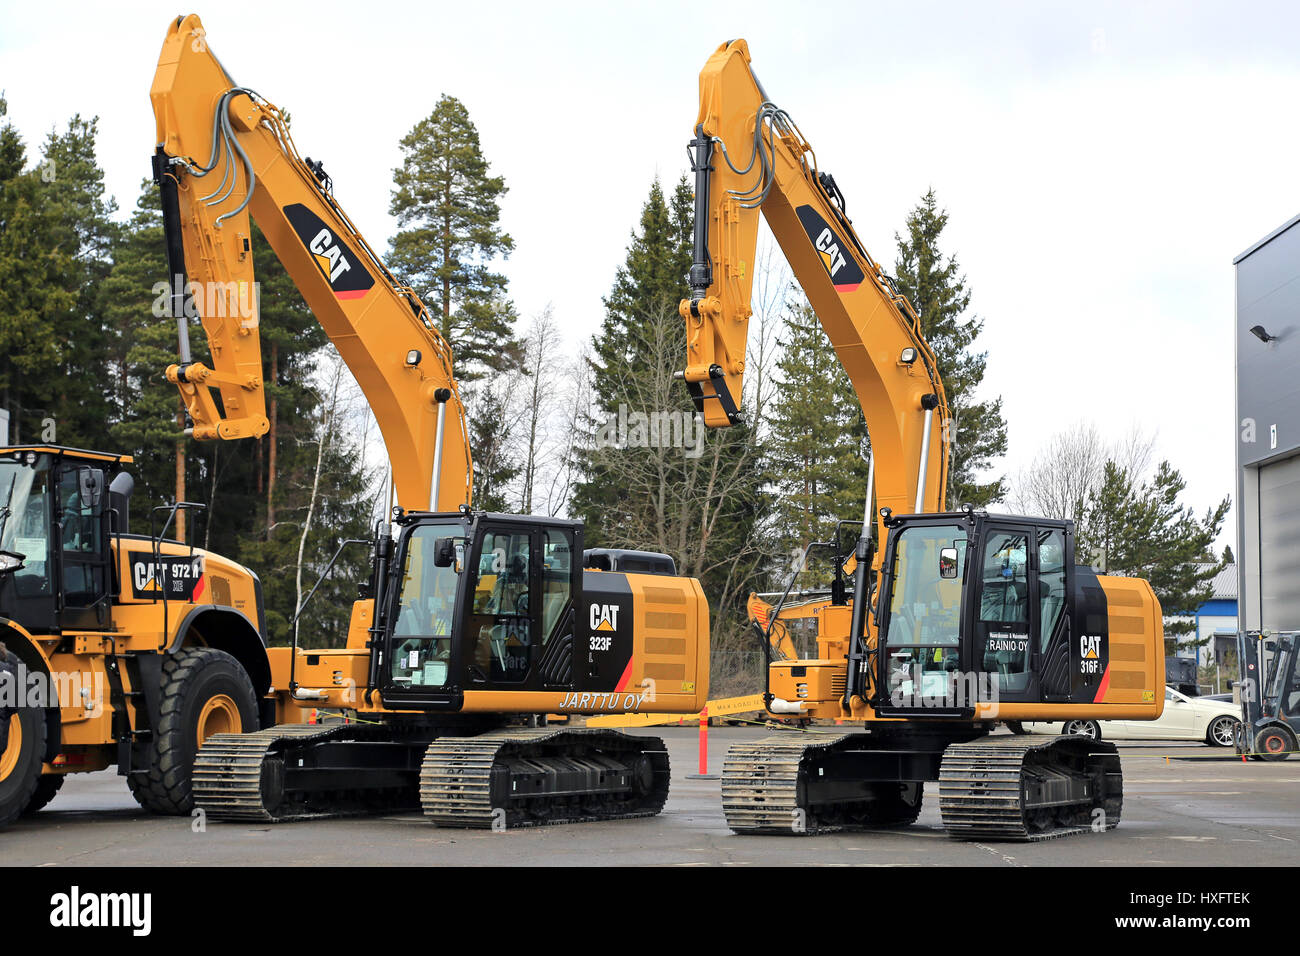 LIETO, FINLAND - MARCH 25, 2017: Cat 323FL and 316FL hydraulic excavators among Cat construction equipment seen at the annual public event of Konekaup Stock Photo